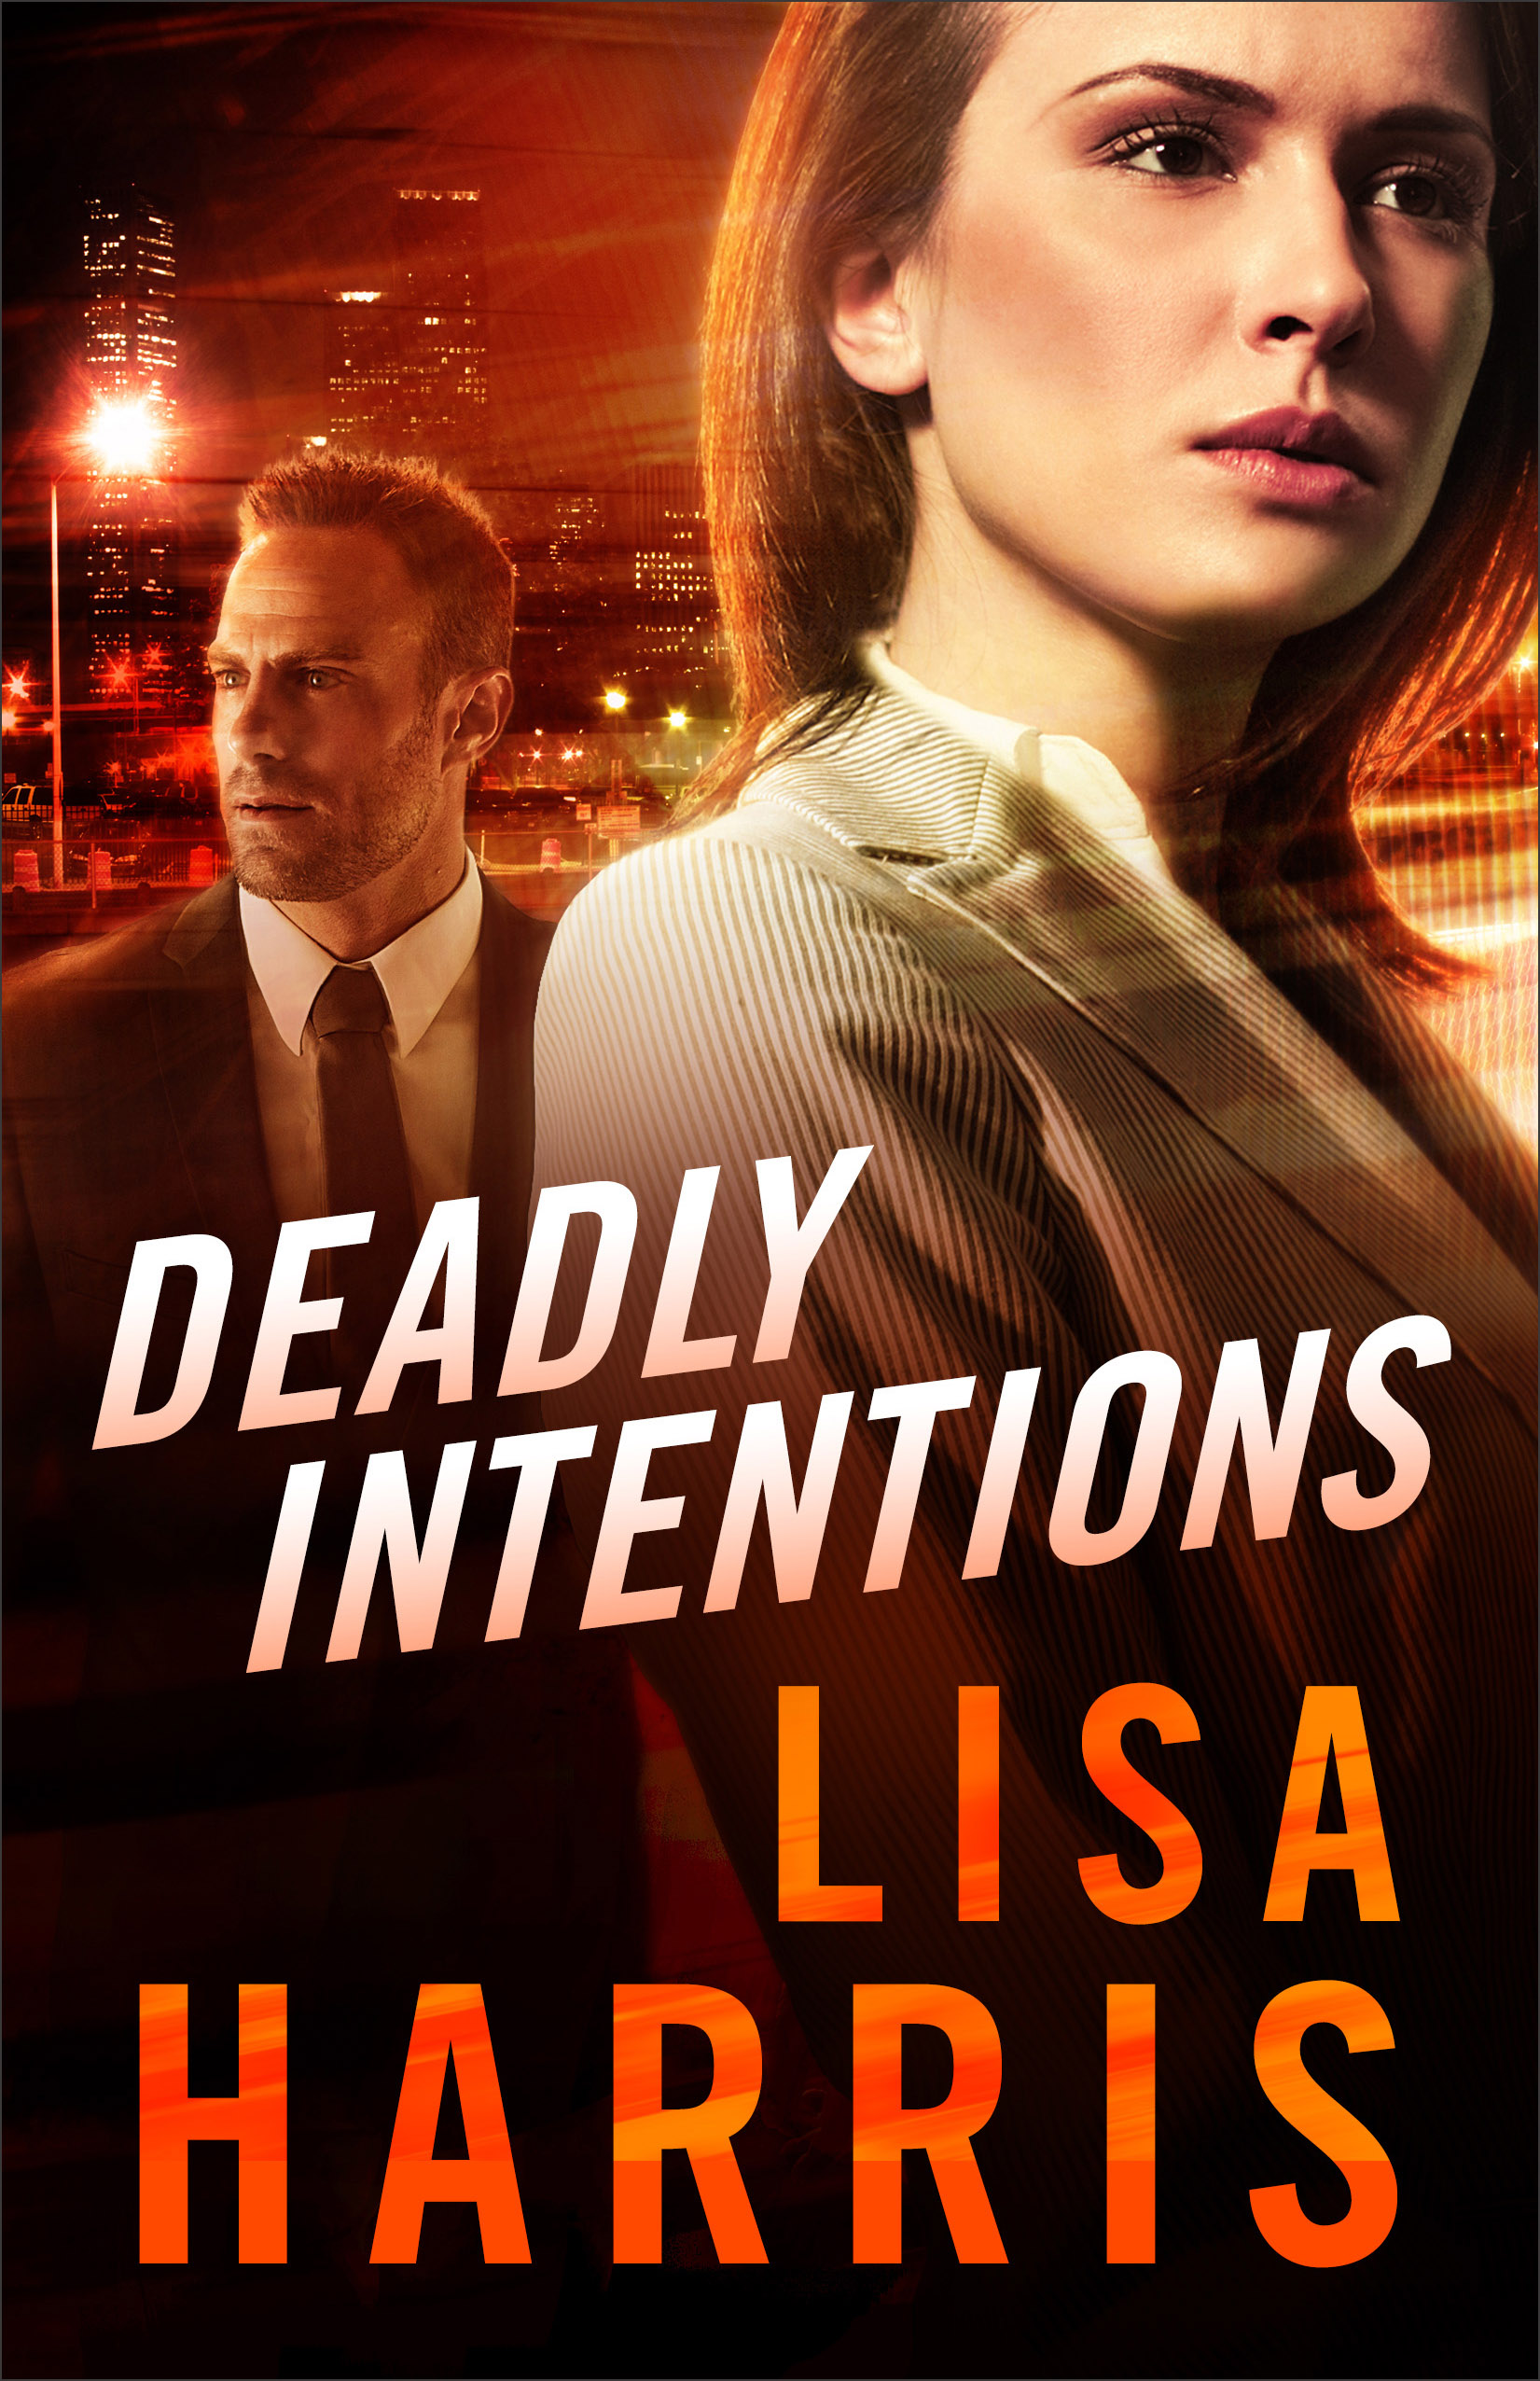 Deadly Intentions By Lisa Harris (Paperback) 9780800729165